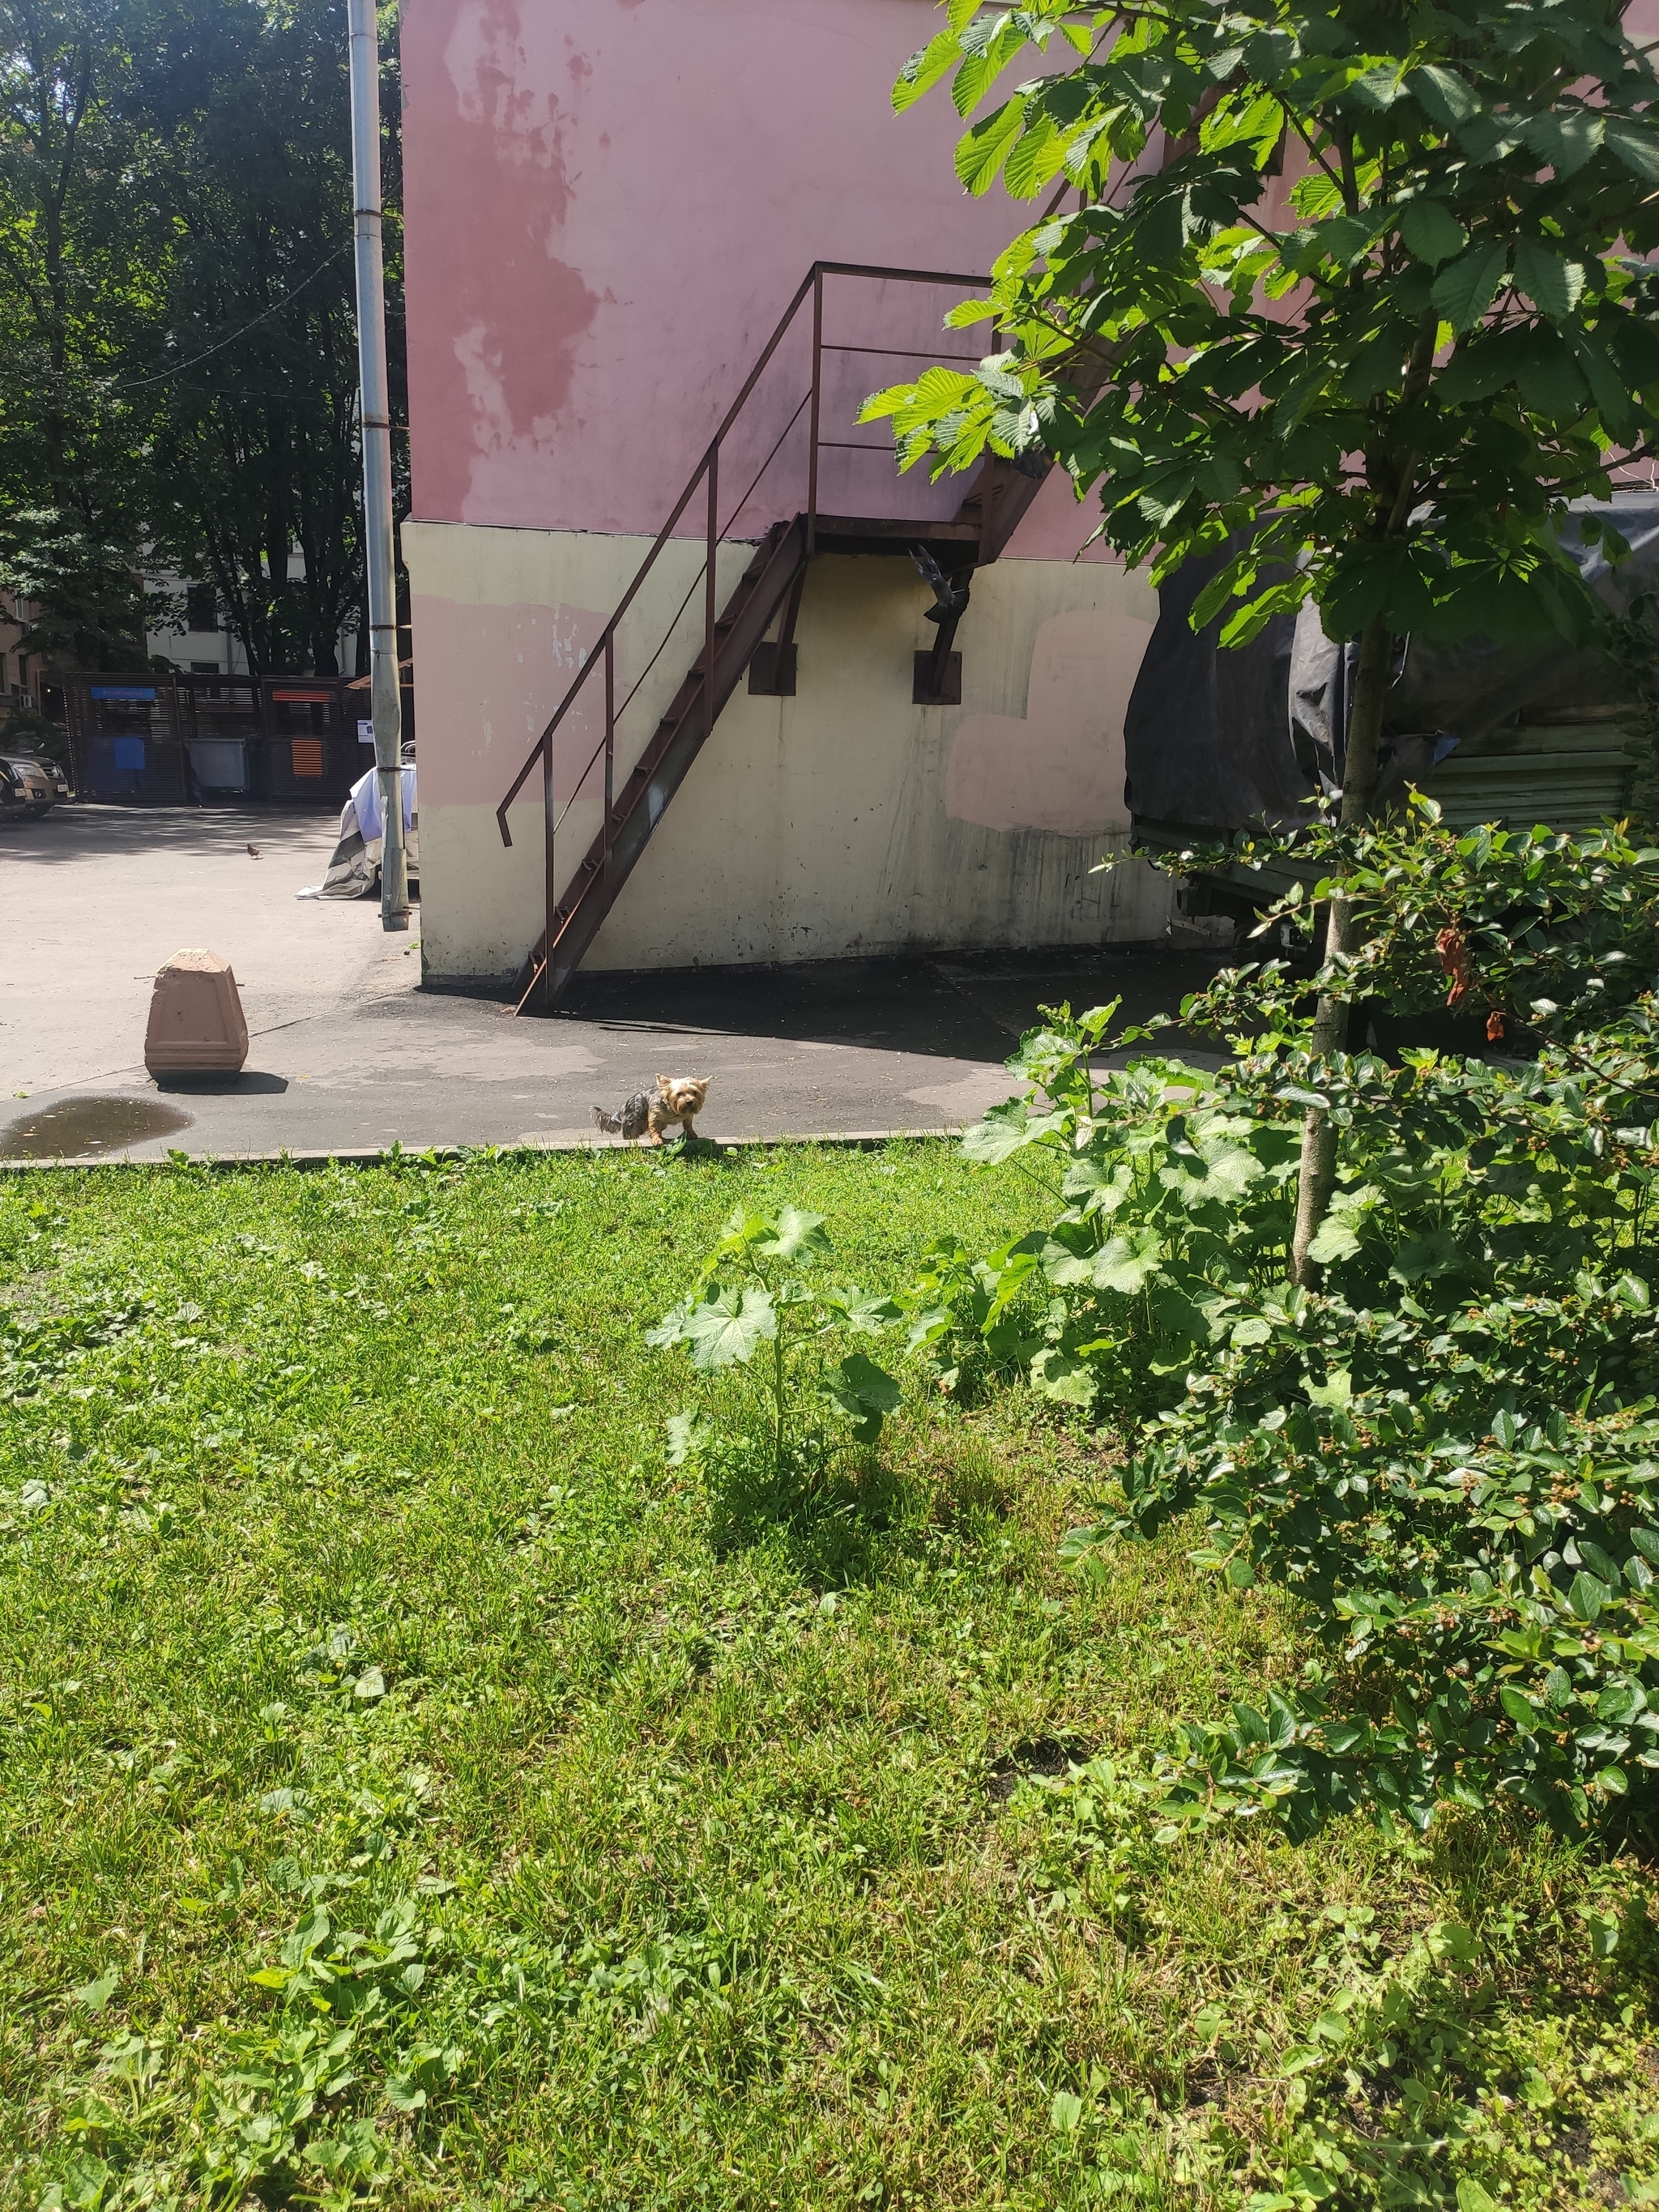 Pesel spotted - My, Dog, Noticed, Longpost, The strength of the Peekaboo, No rating, Moscow, Found a dog, The dog is missing